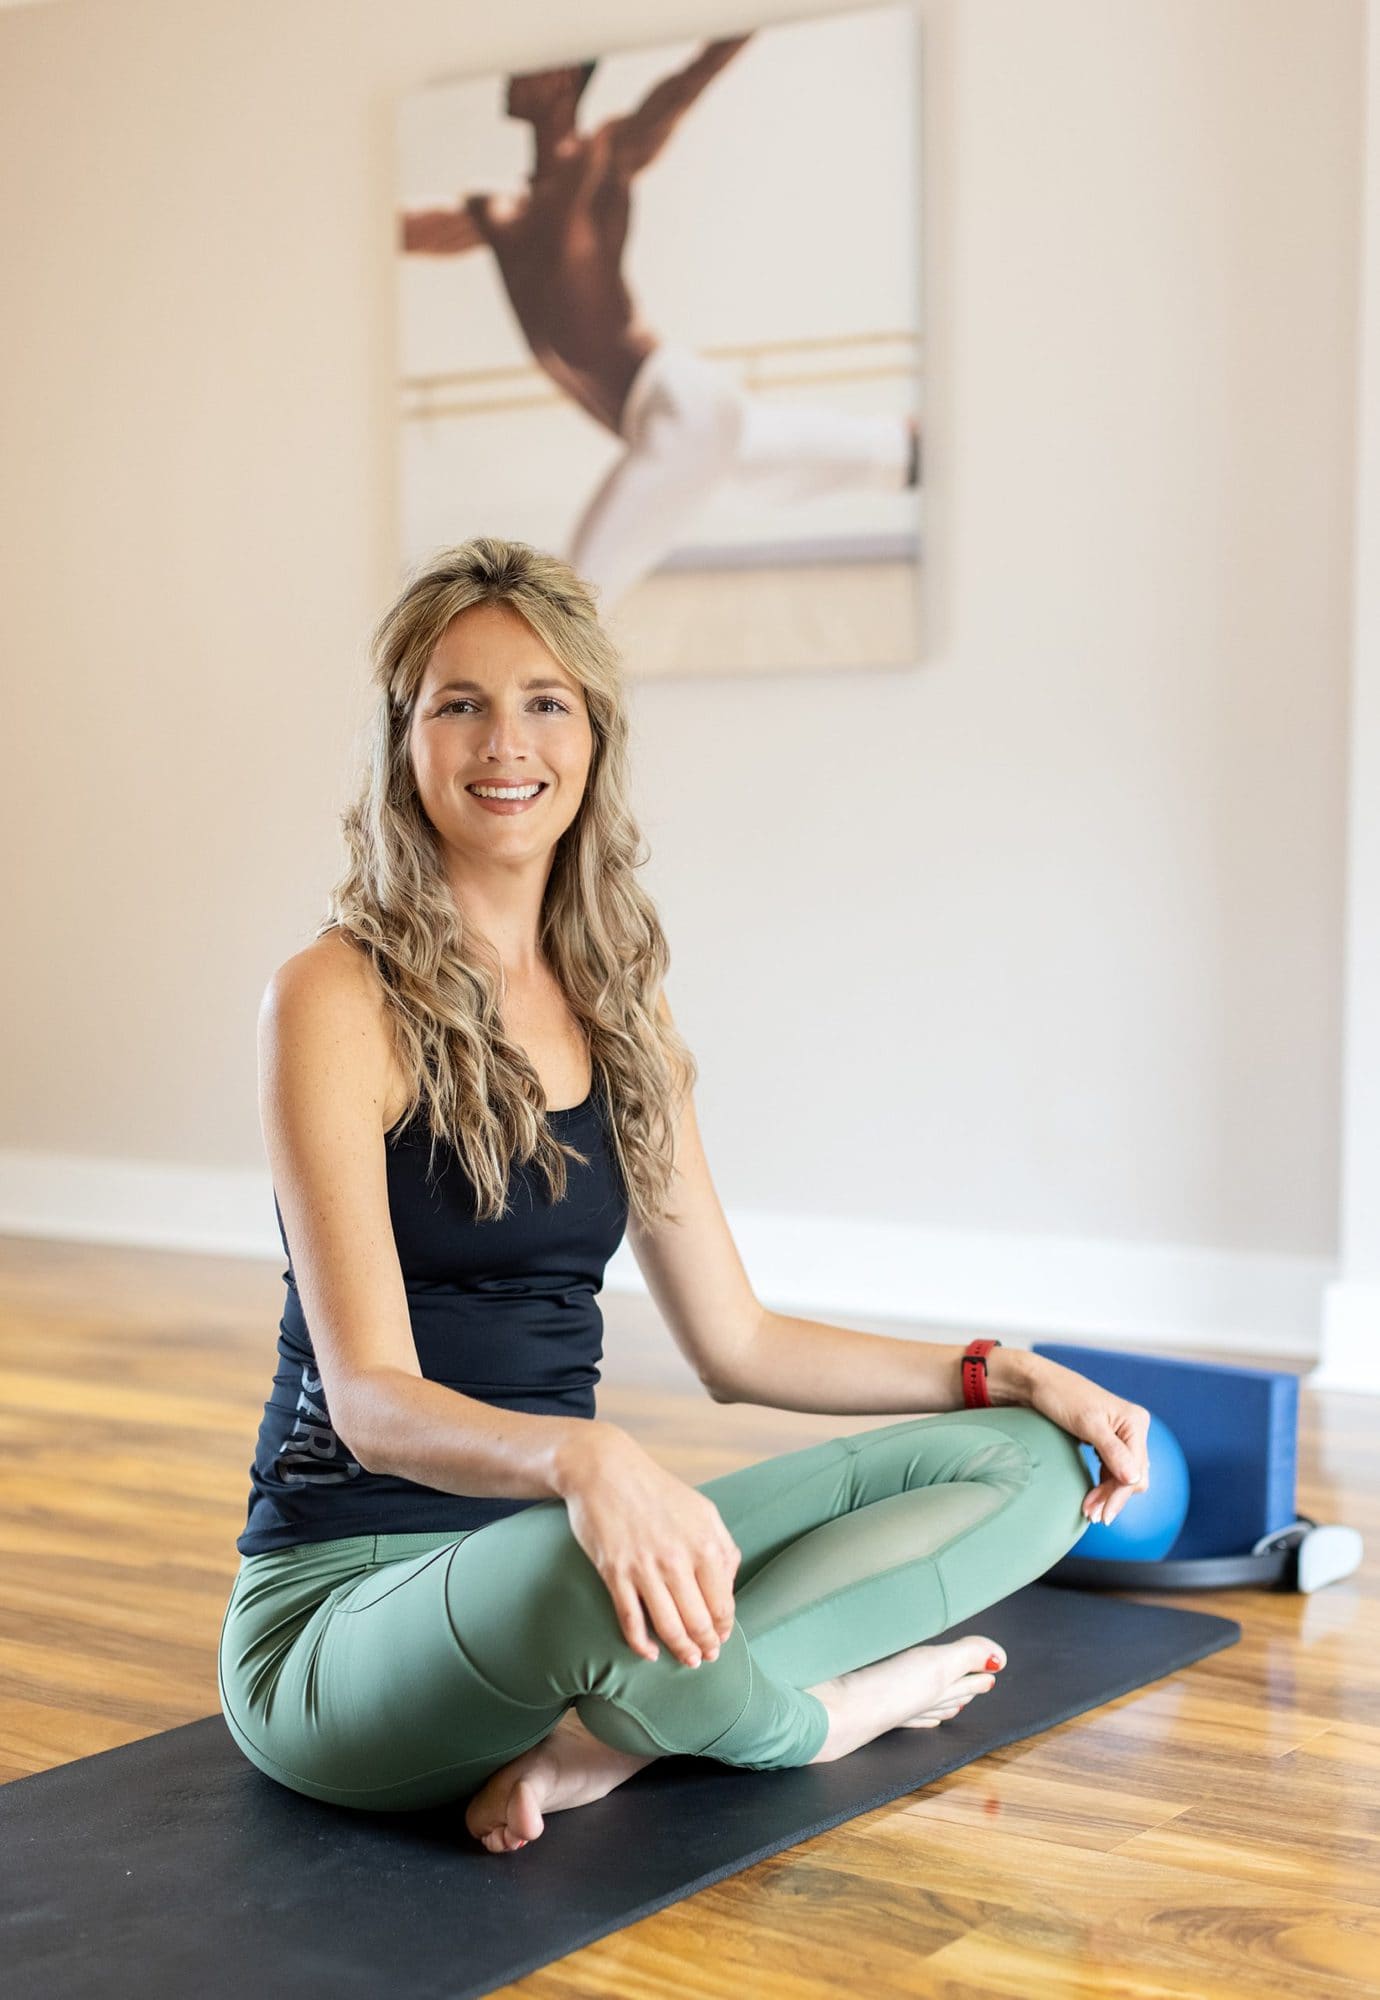 Pilates Teacher poses for a Personal Branding Photoshoot in Clare, Suffolk